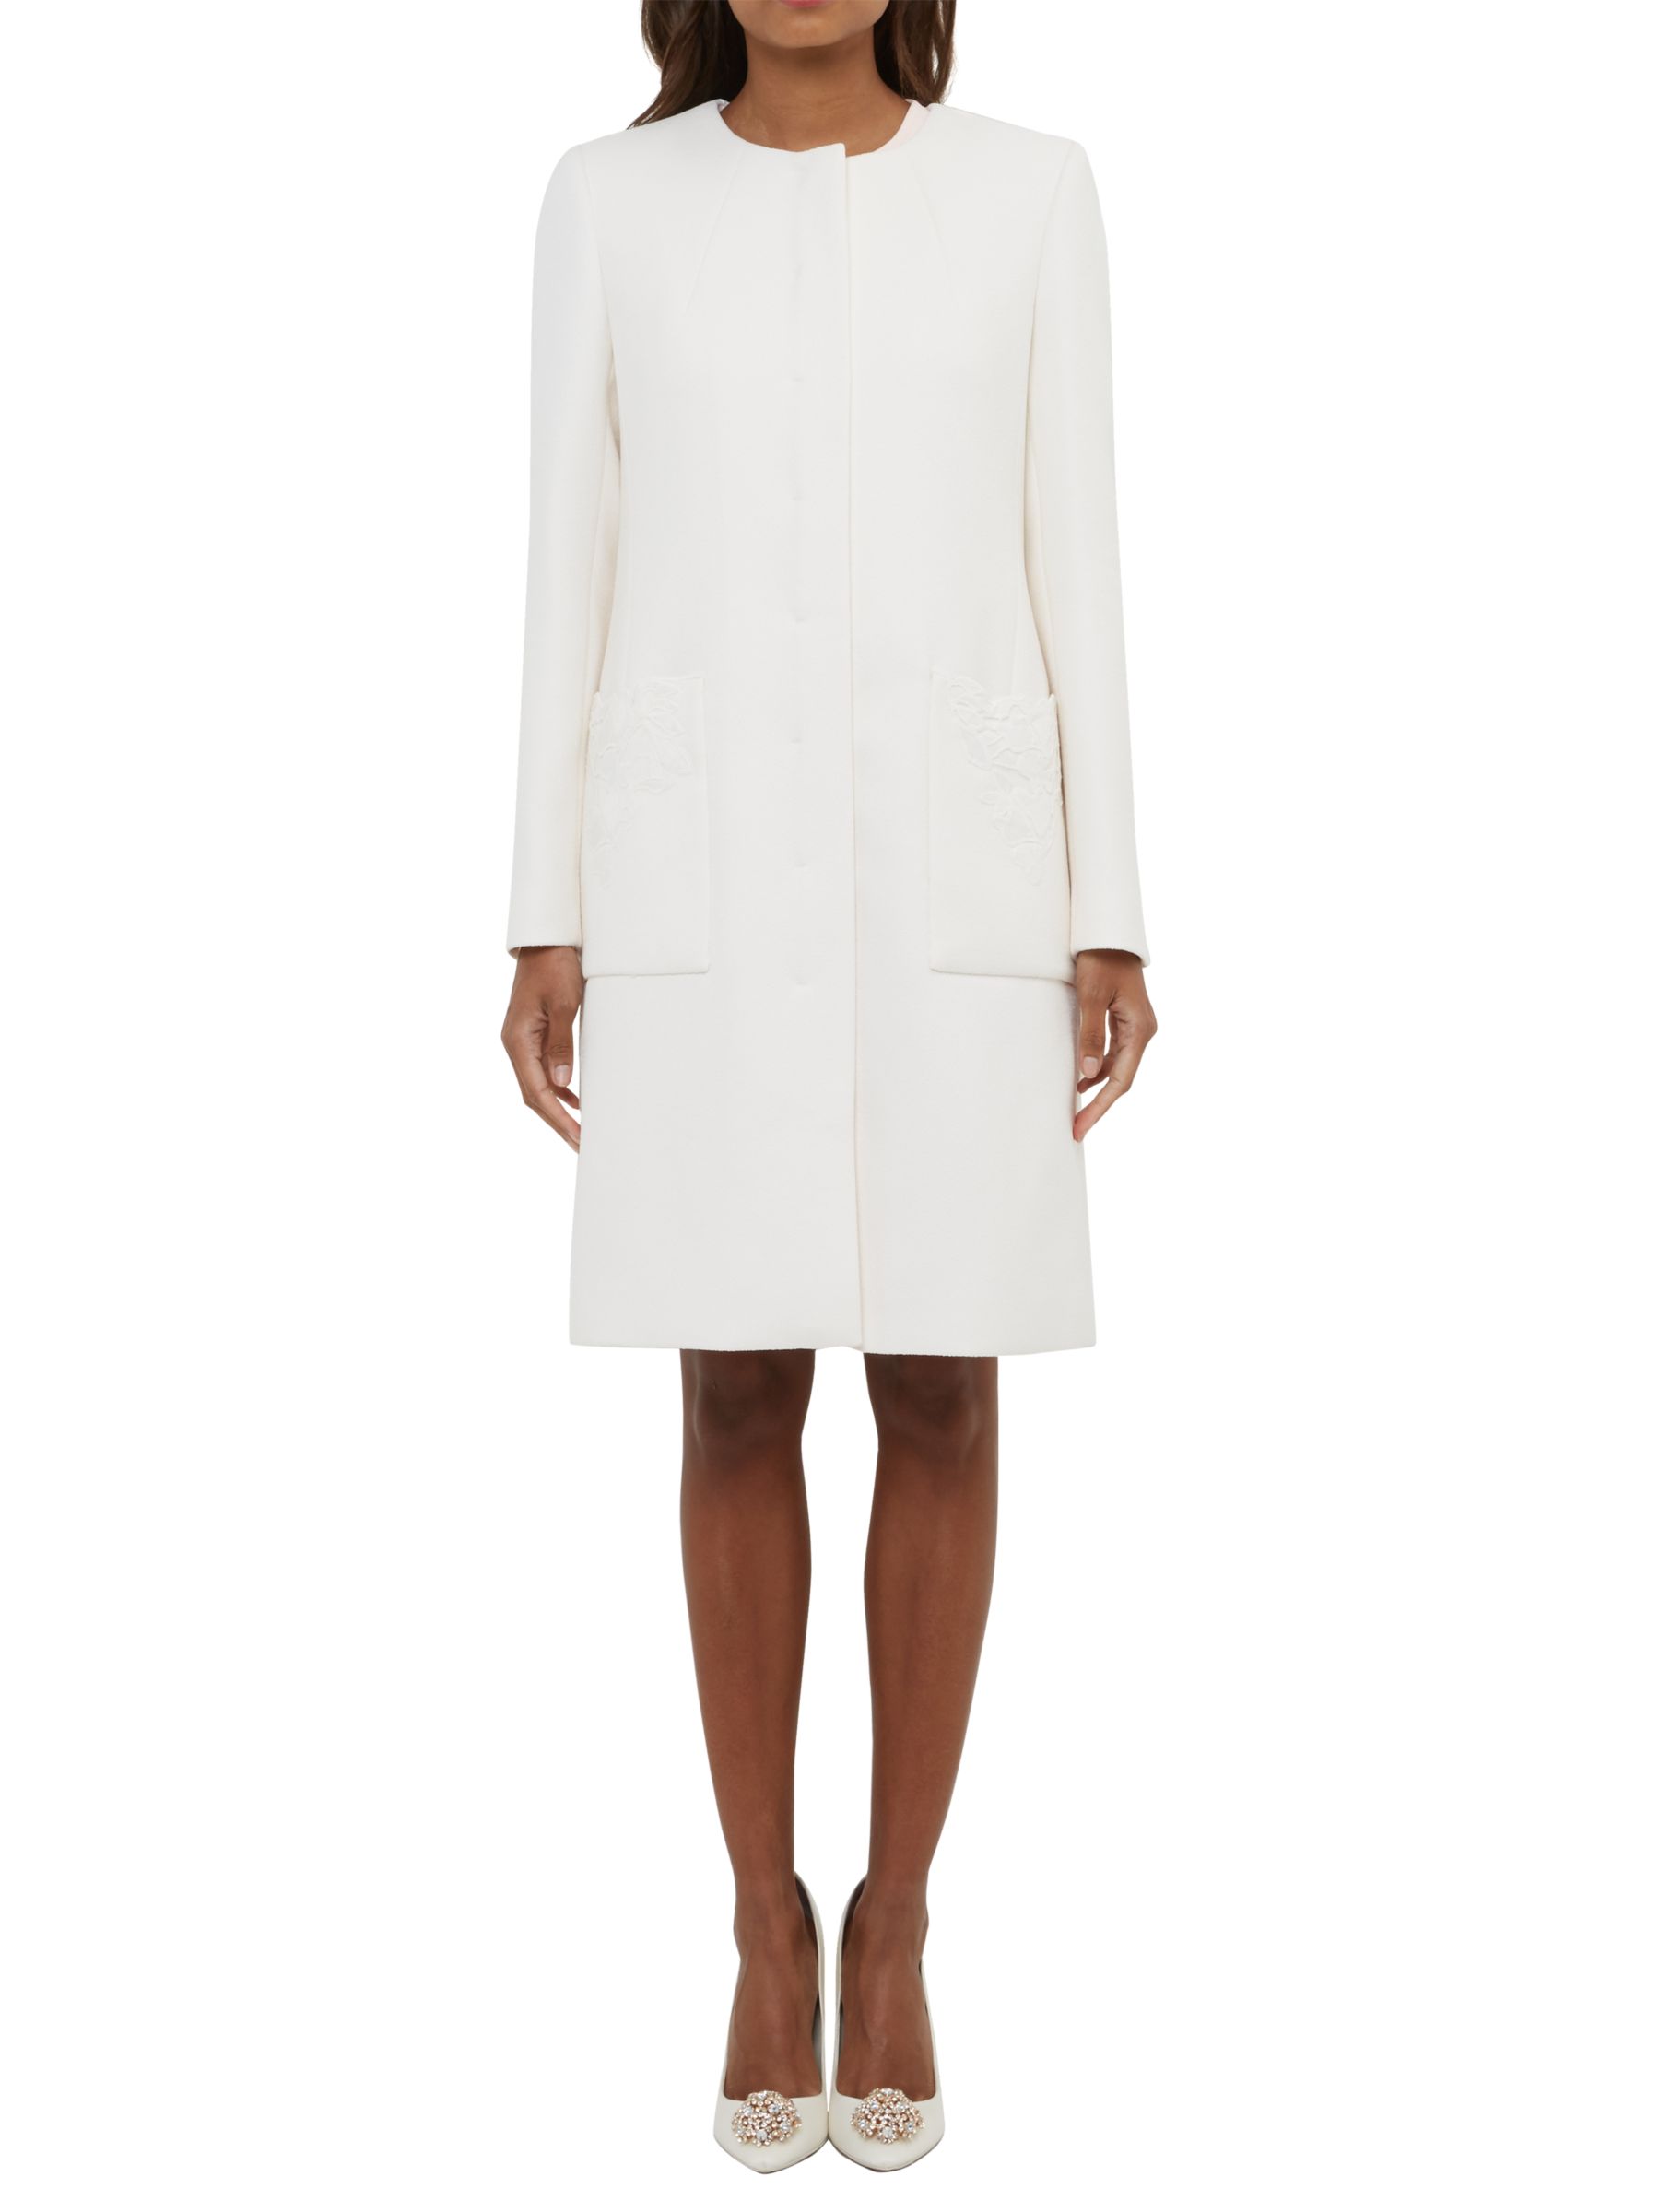 Ted Baker Lace Trim Coat, White at John Lewis & Partners